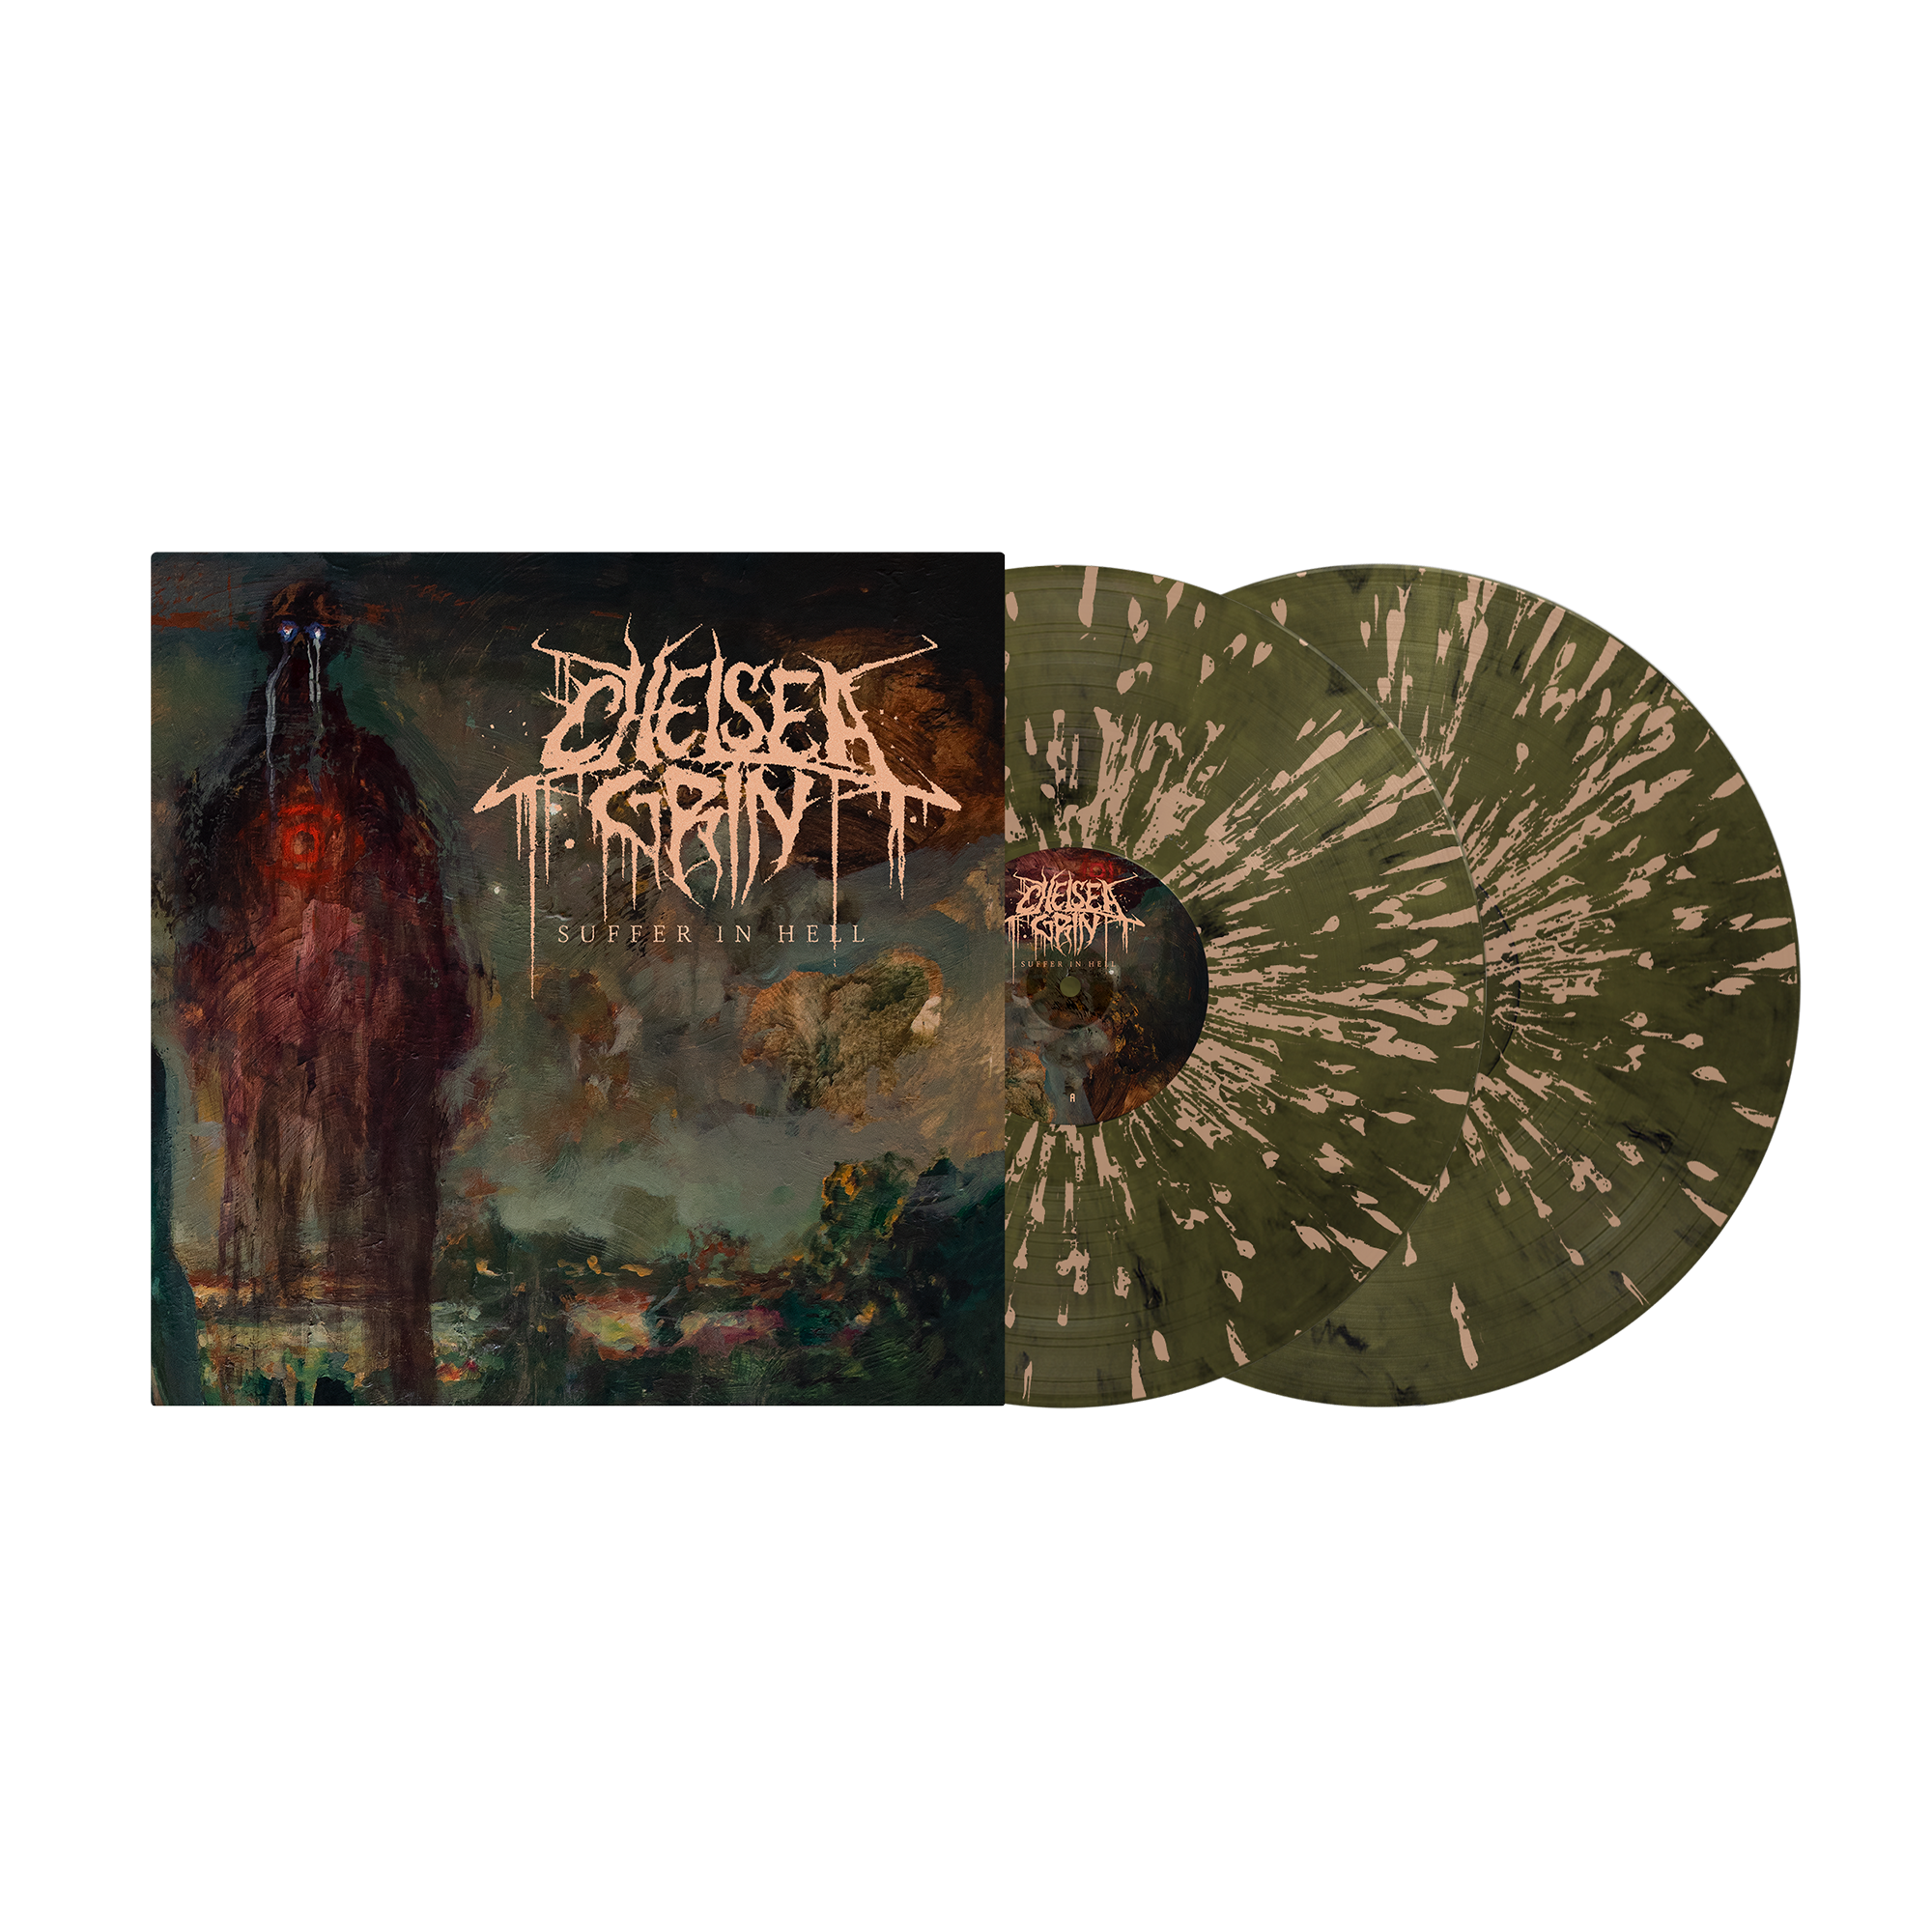 Chelsea Grin - Suffer in Hell // Suffer in Heaven - Olive Green & Black Marble w/Gold (Limited to 500)